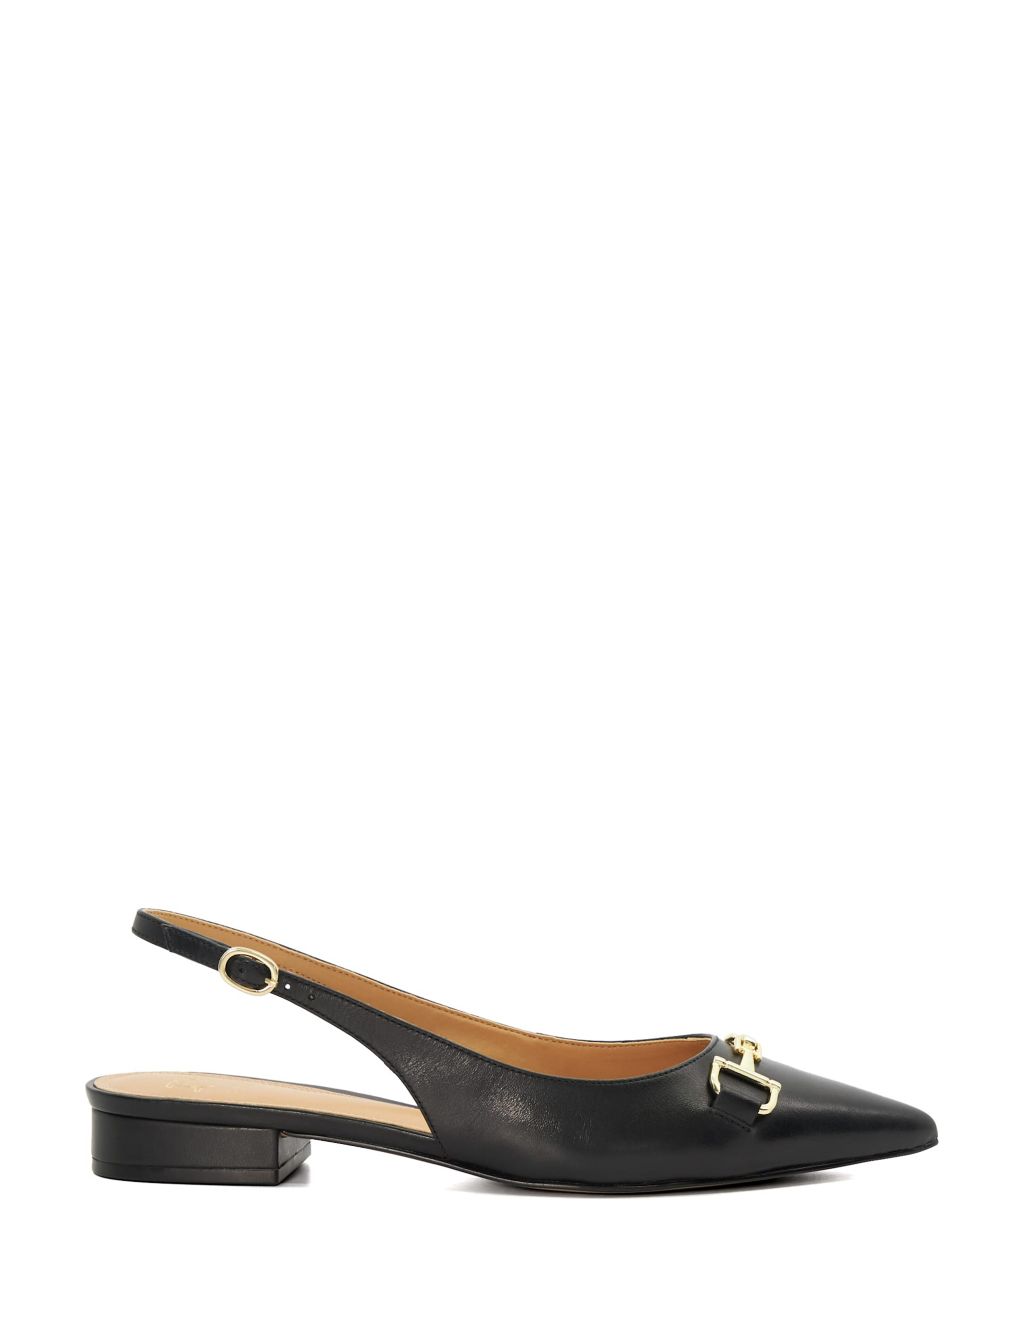 Leather Buckle Flat Pointed Ballet Pumps